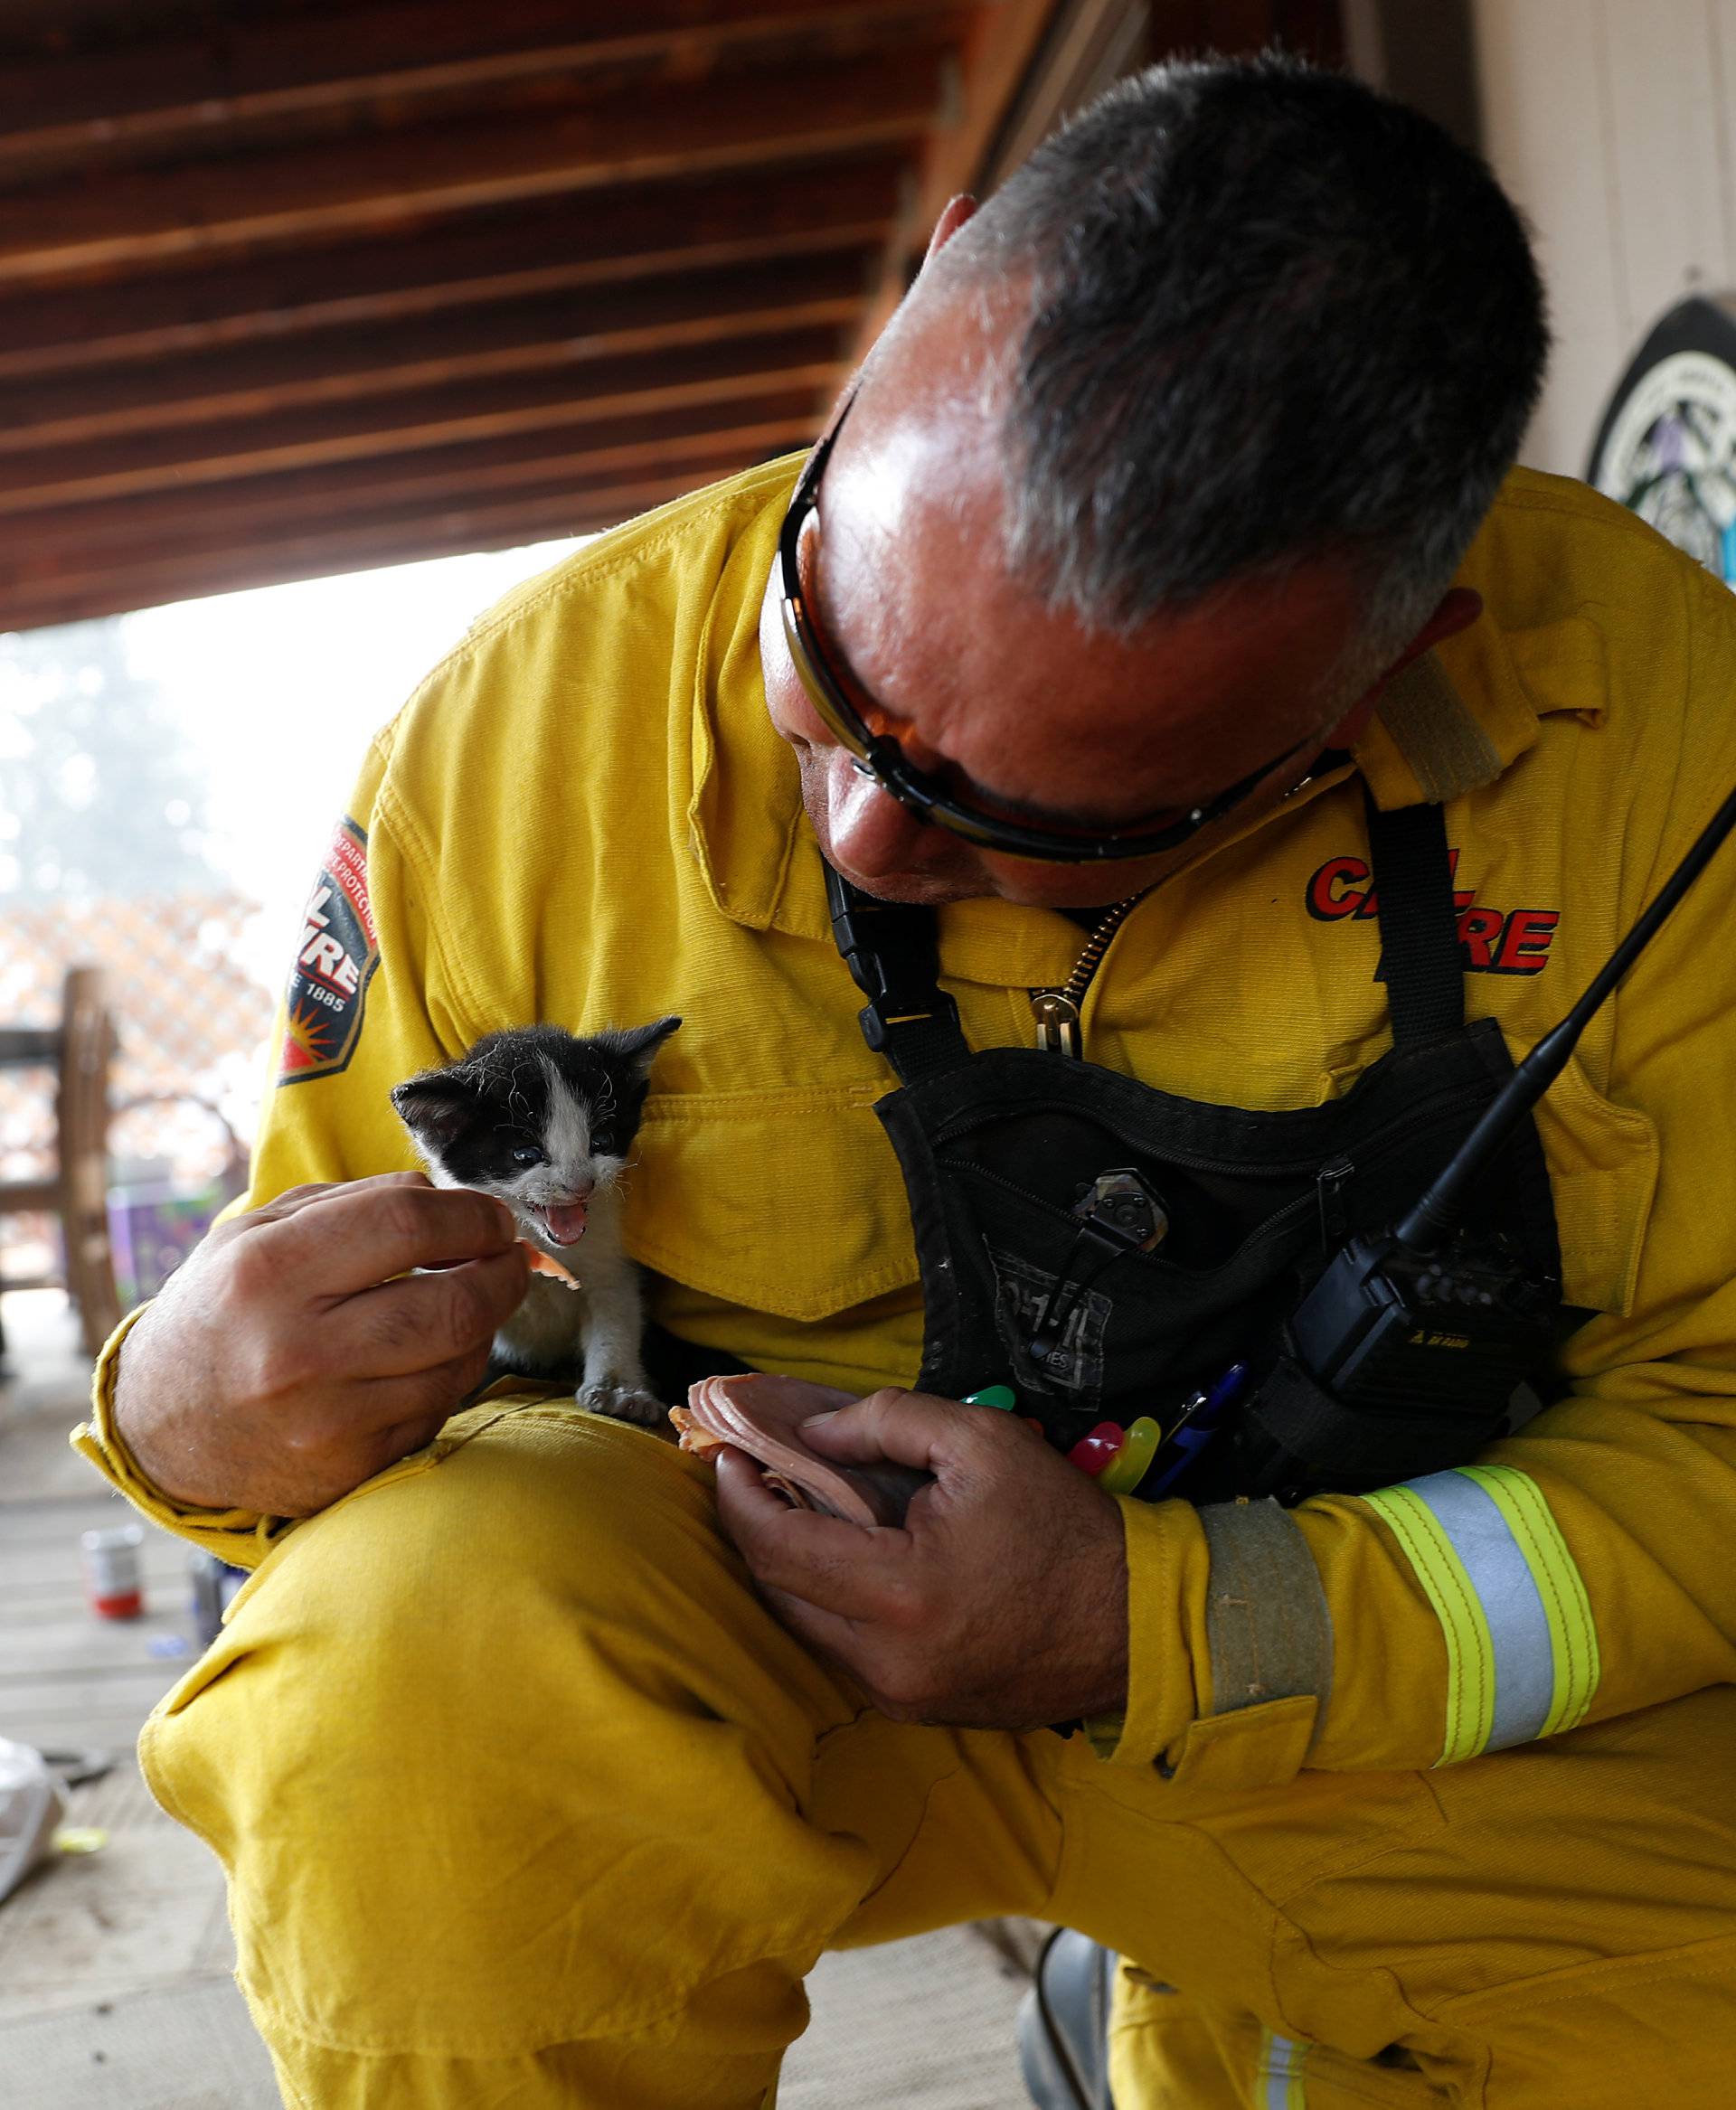 Cal Fire San Mateo-Santa Cruz Battalion Chief Aldo Gonzales feeds an injured kitten at a home while battling the Clayton Fire at Lower Lake in California